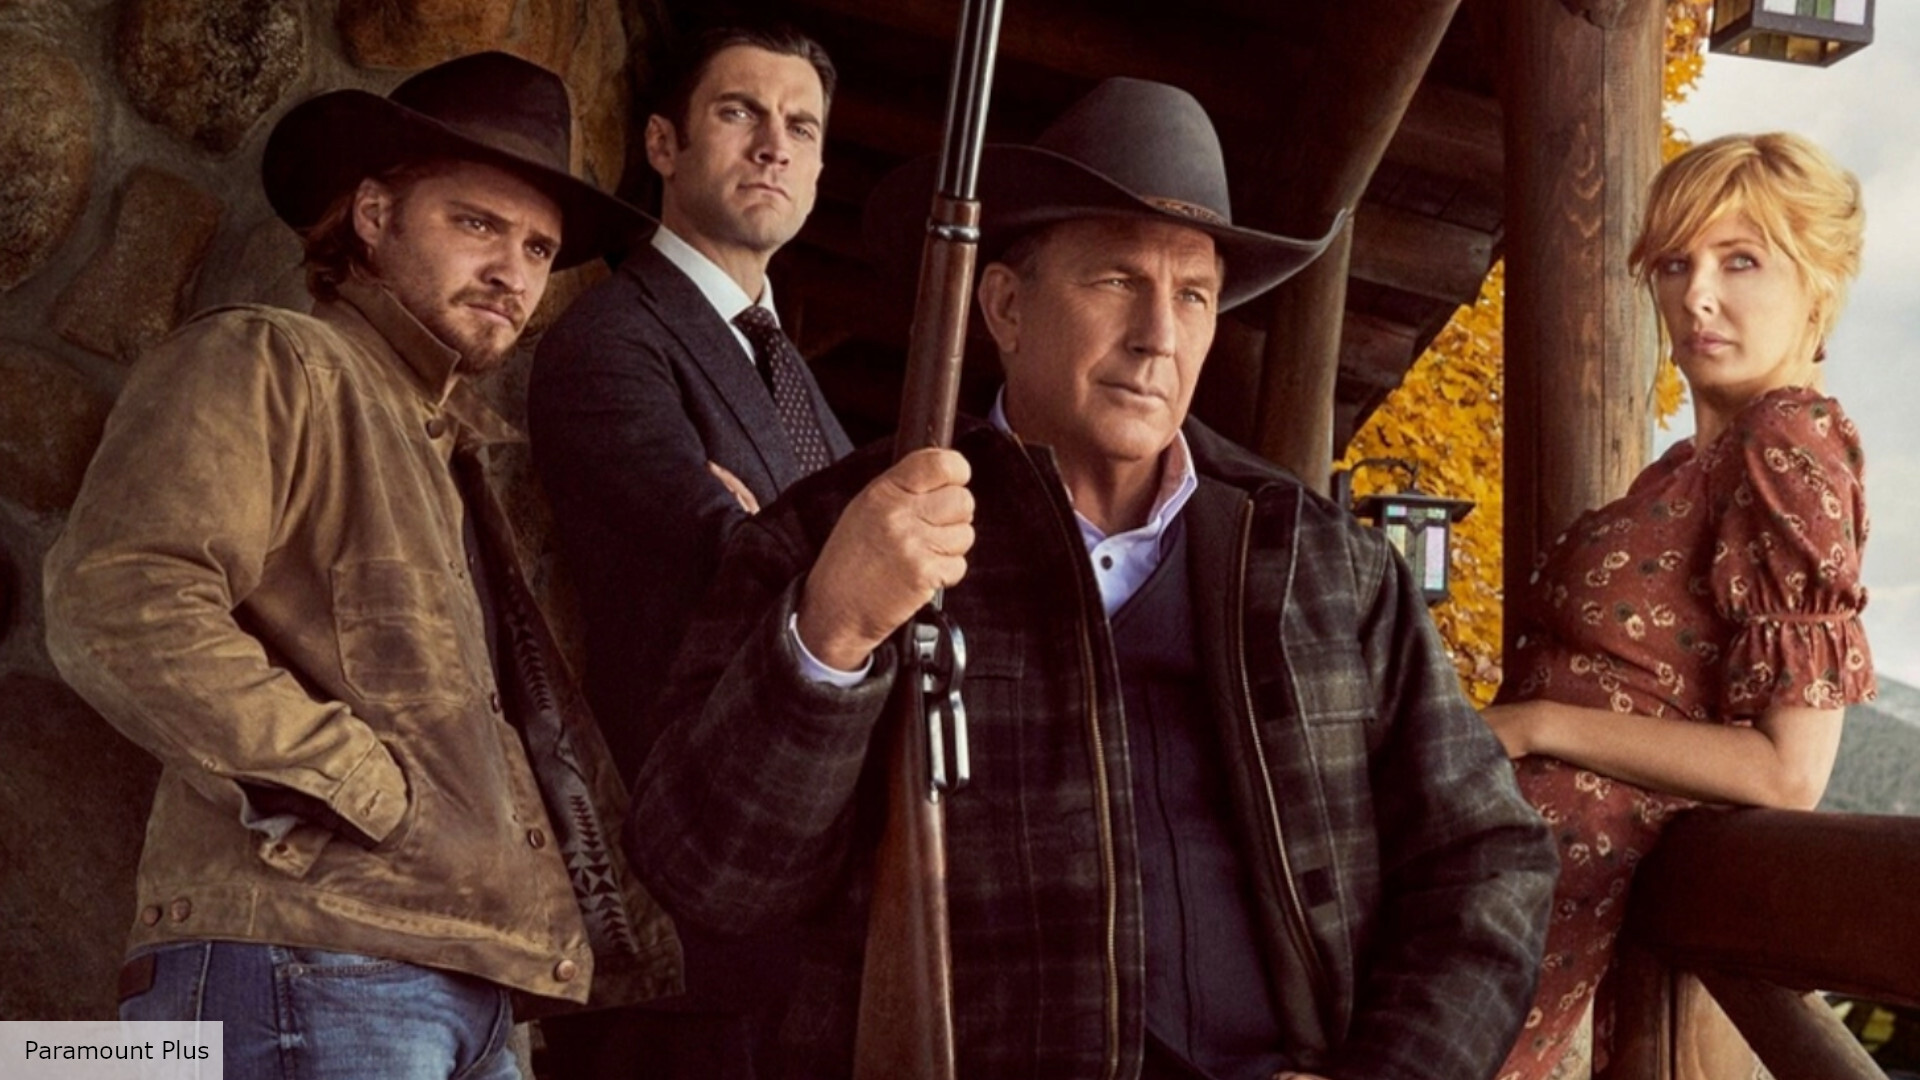 Has Yellowstone been cancelled? The Digital Fix